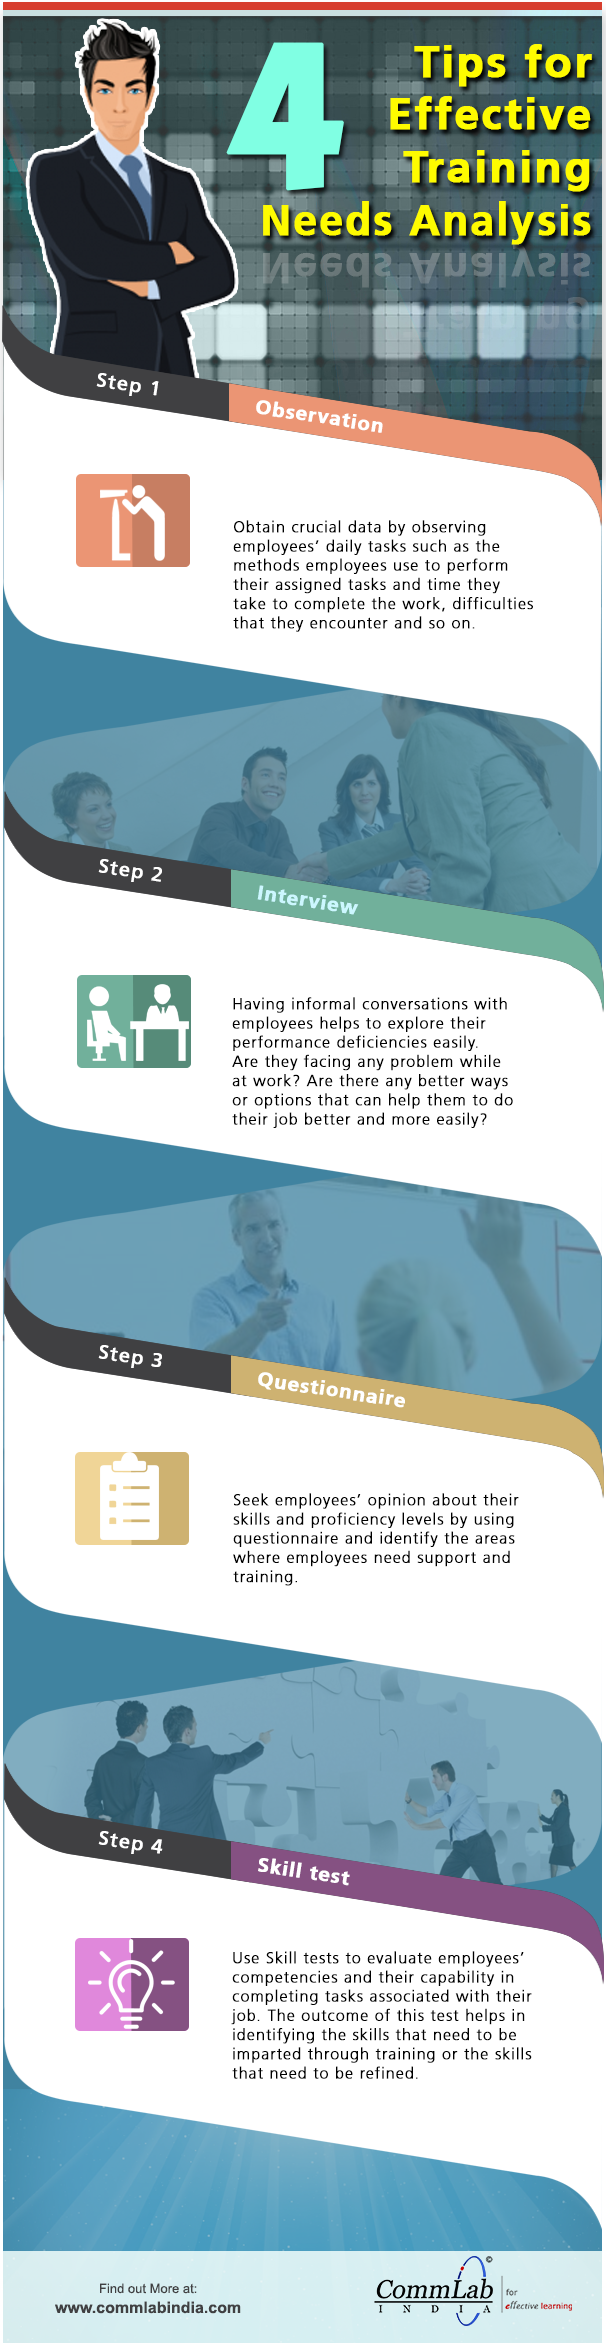 4 Tips for Effective Training Needs Analysis - An Infographic